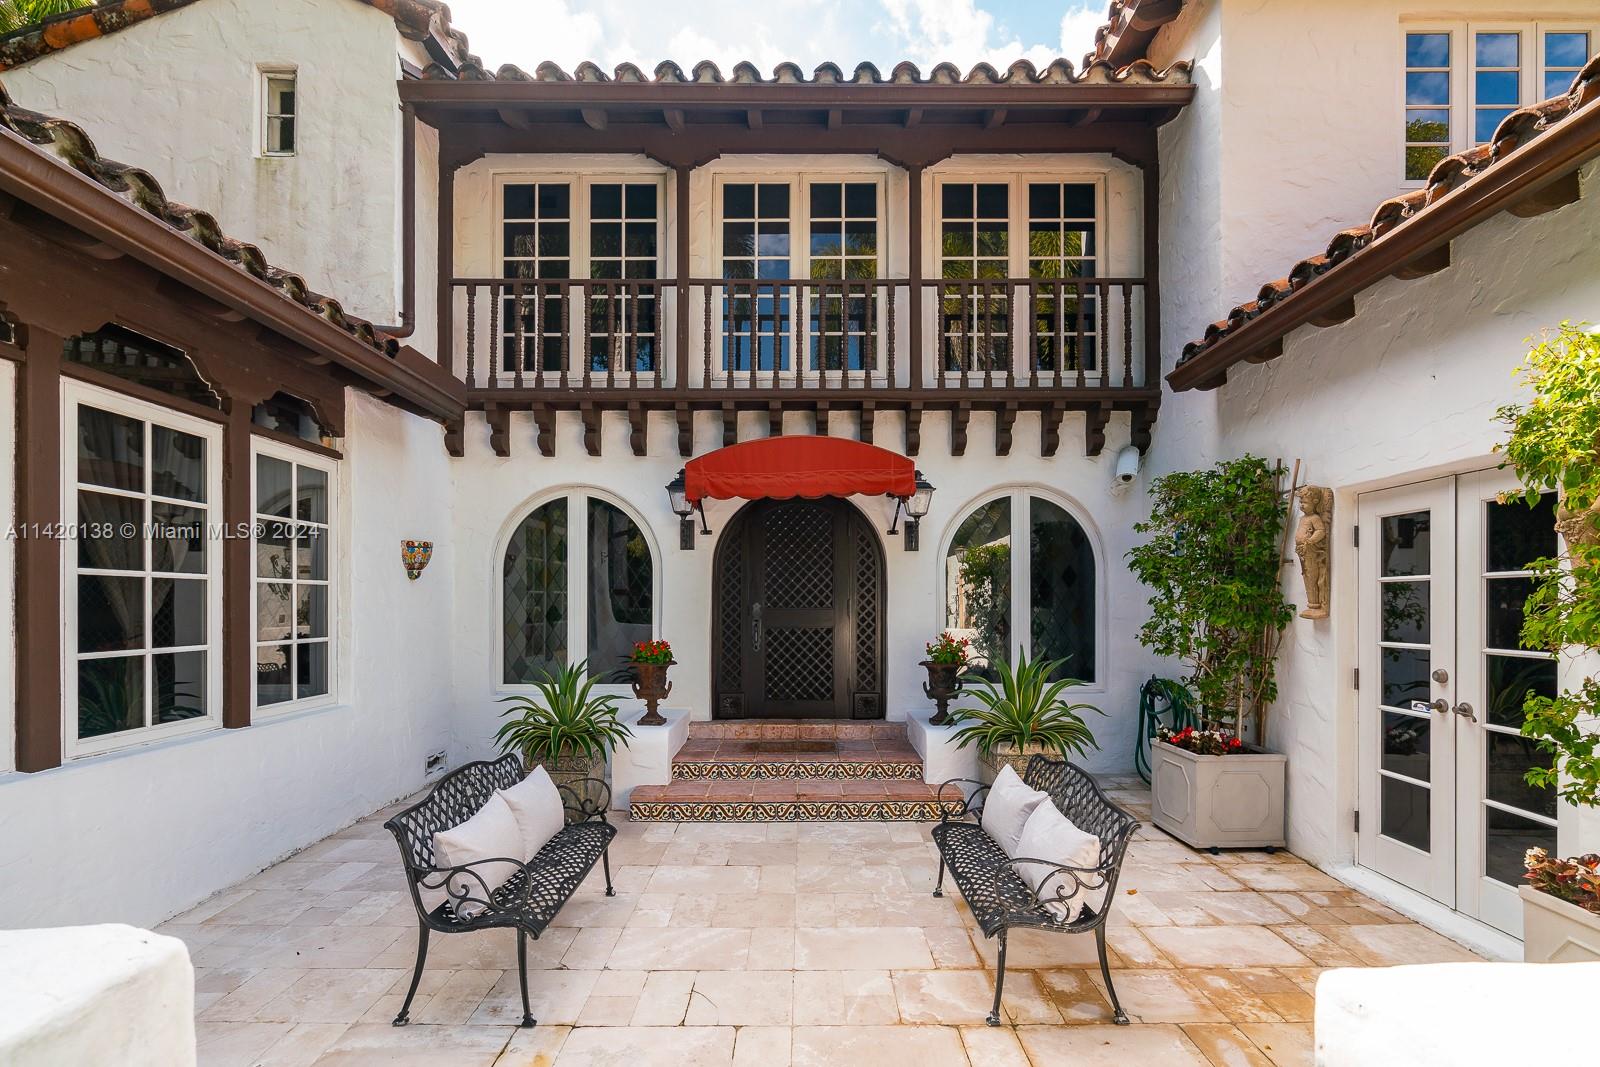 Beautifully restored, historically designated 1920&#039;s Old Spanish style villa with 6397 actual square feet (5044 living area) on a 15,750 sq ft lot steps from the Biltmore Hotel &amp; Golf Course, Salvadore Park and the Venetian Pool. Classical architecture with loggia, Palladian window frames, high timber-beamed ceilings &amp; sun-dappled courtyards. There are 6 bedrooms and 6.5 bathrooms. The primary bedroom suite &amp; 3 other bedrooms are upstairs.  Guest bedroom and a maid&#039;s bedroom on the 1st floor. Summer kitchen, large library &amp; office by the heated pool. The home is walled and gated and within walking distance to many Coral Gables landmark destinations and to Downtown Coral Gables. 2-car garage, impact doors &amp; windows. Also available for annual lease at $35,000 a month or $45,000 furnished